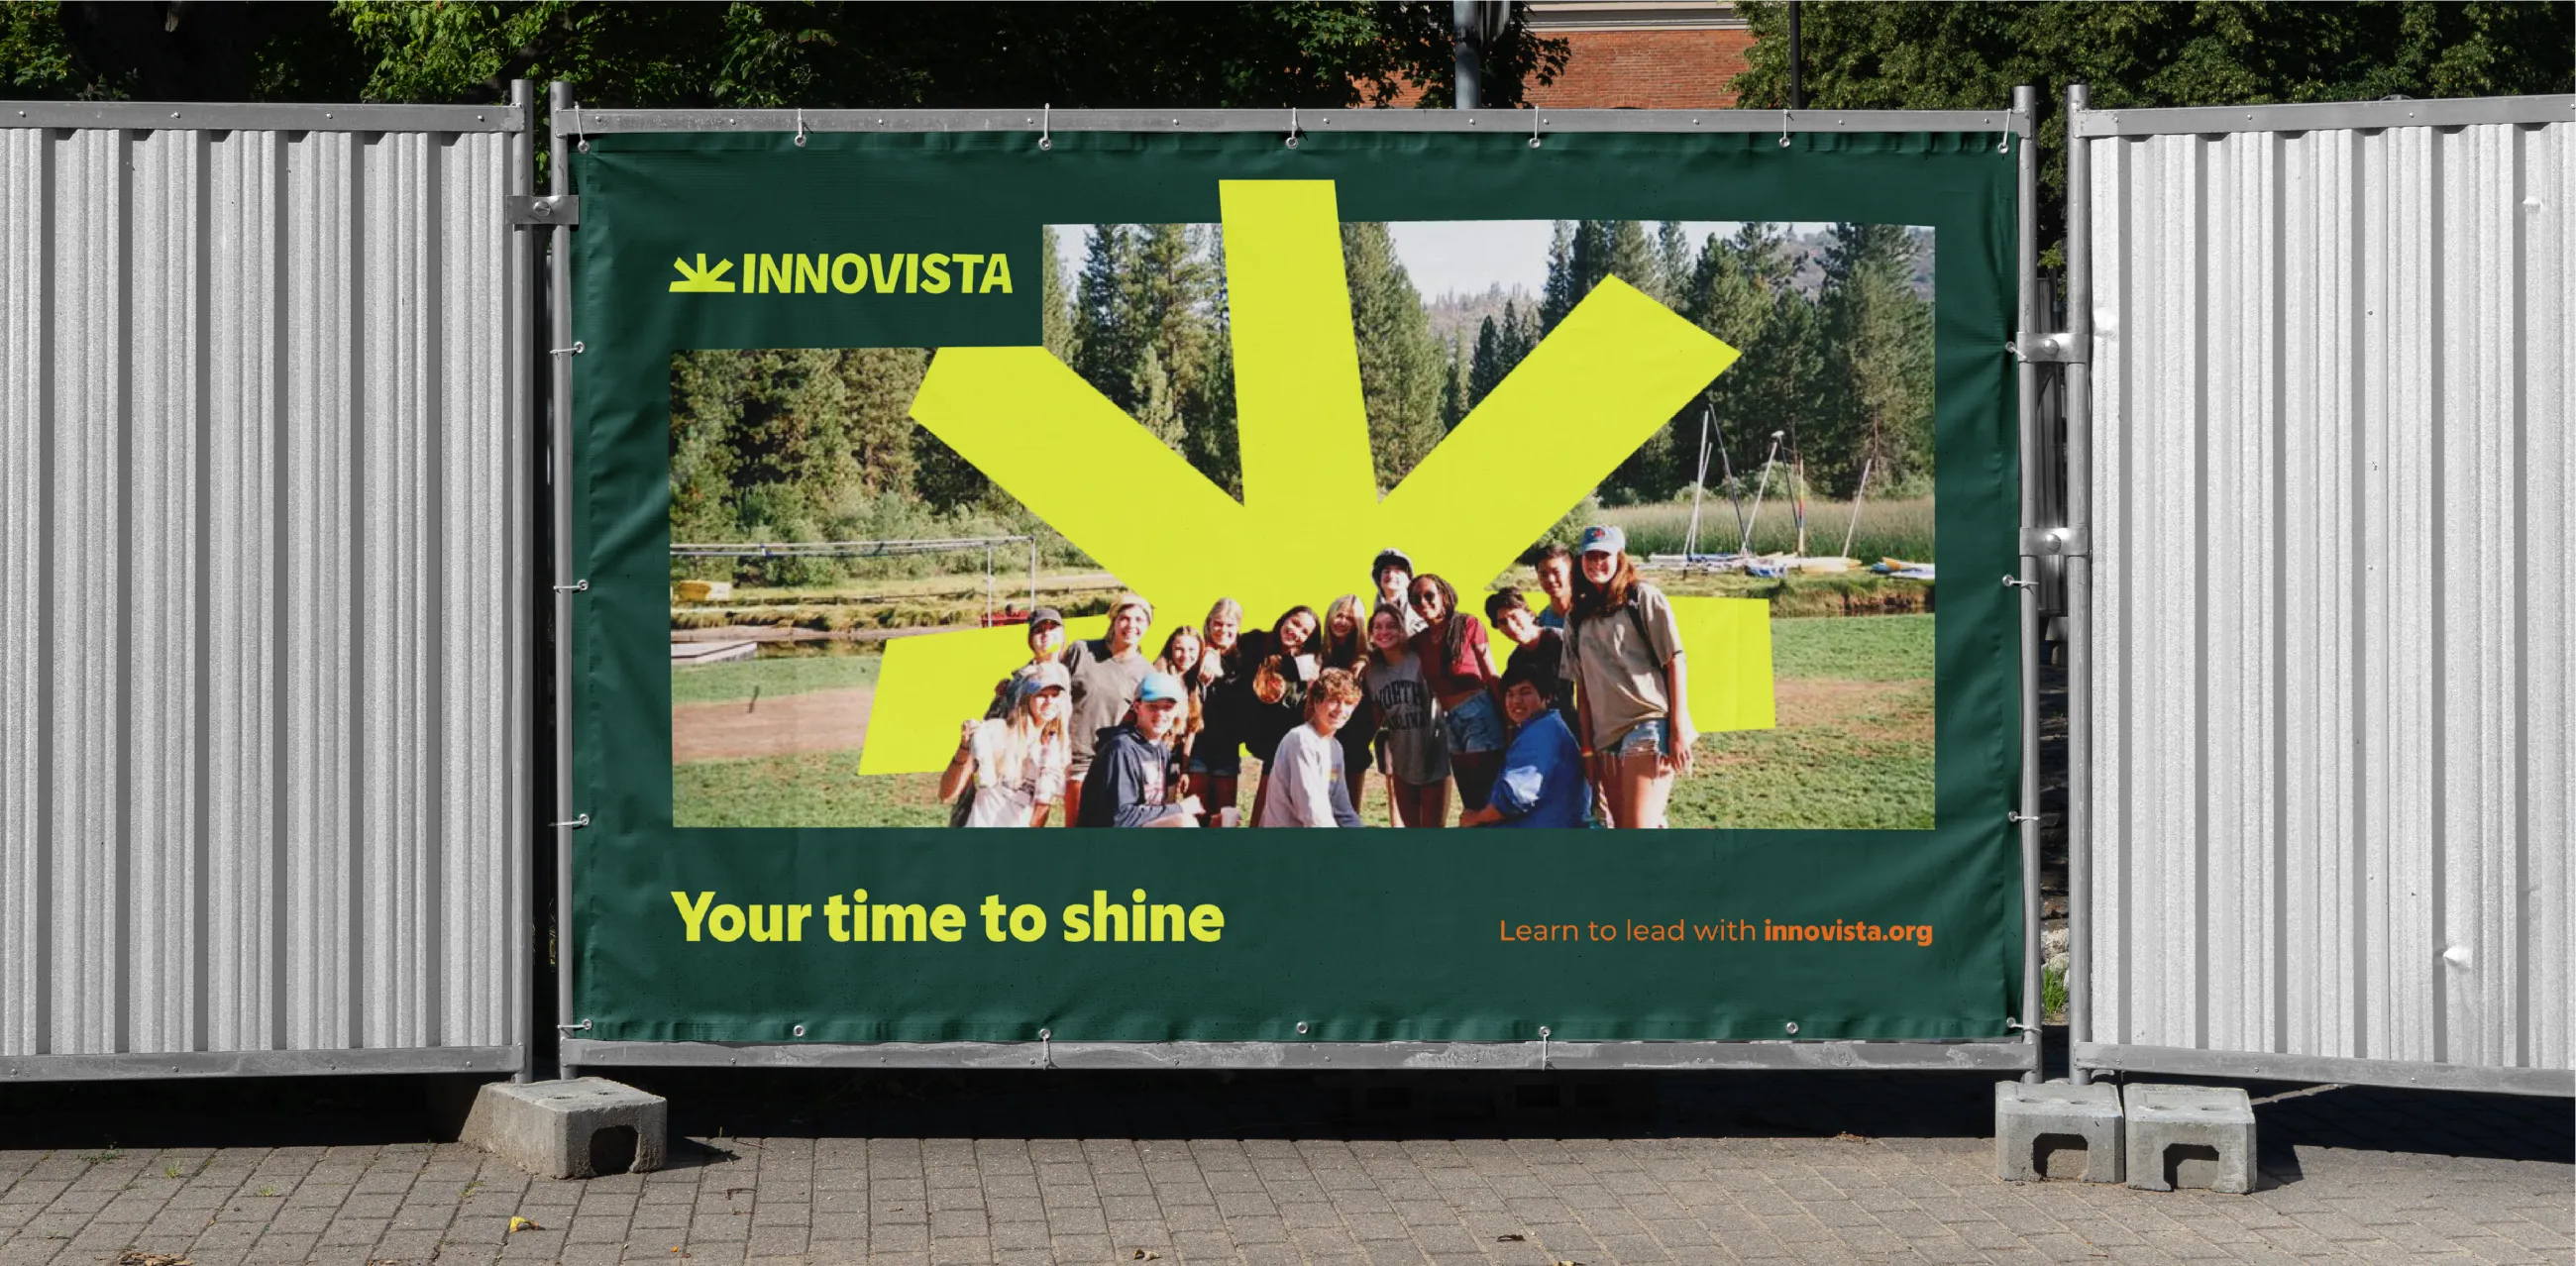 Innovista poster with strapline 'your time to shine'. Group photo of Innovista leaders, with a large yellow sunrise icon behind them.